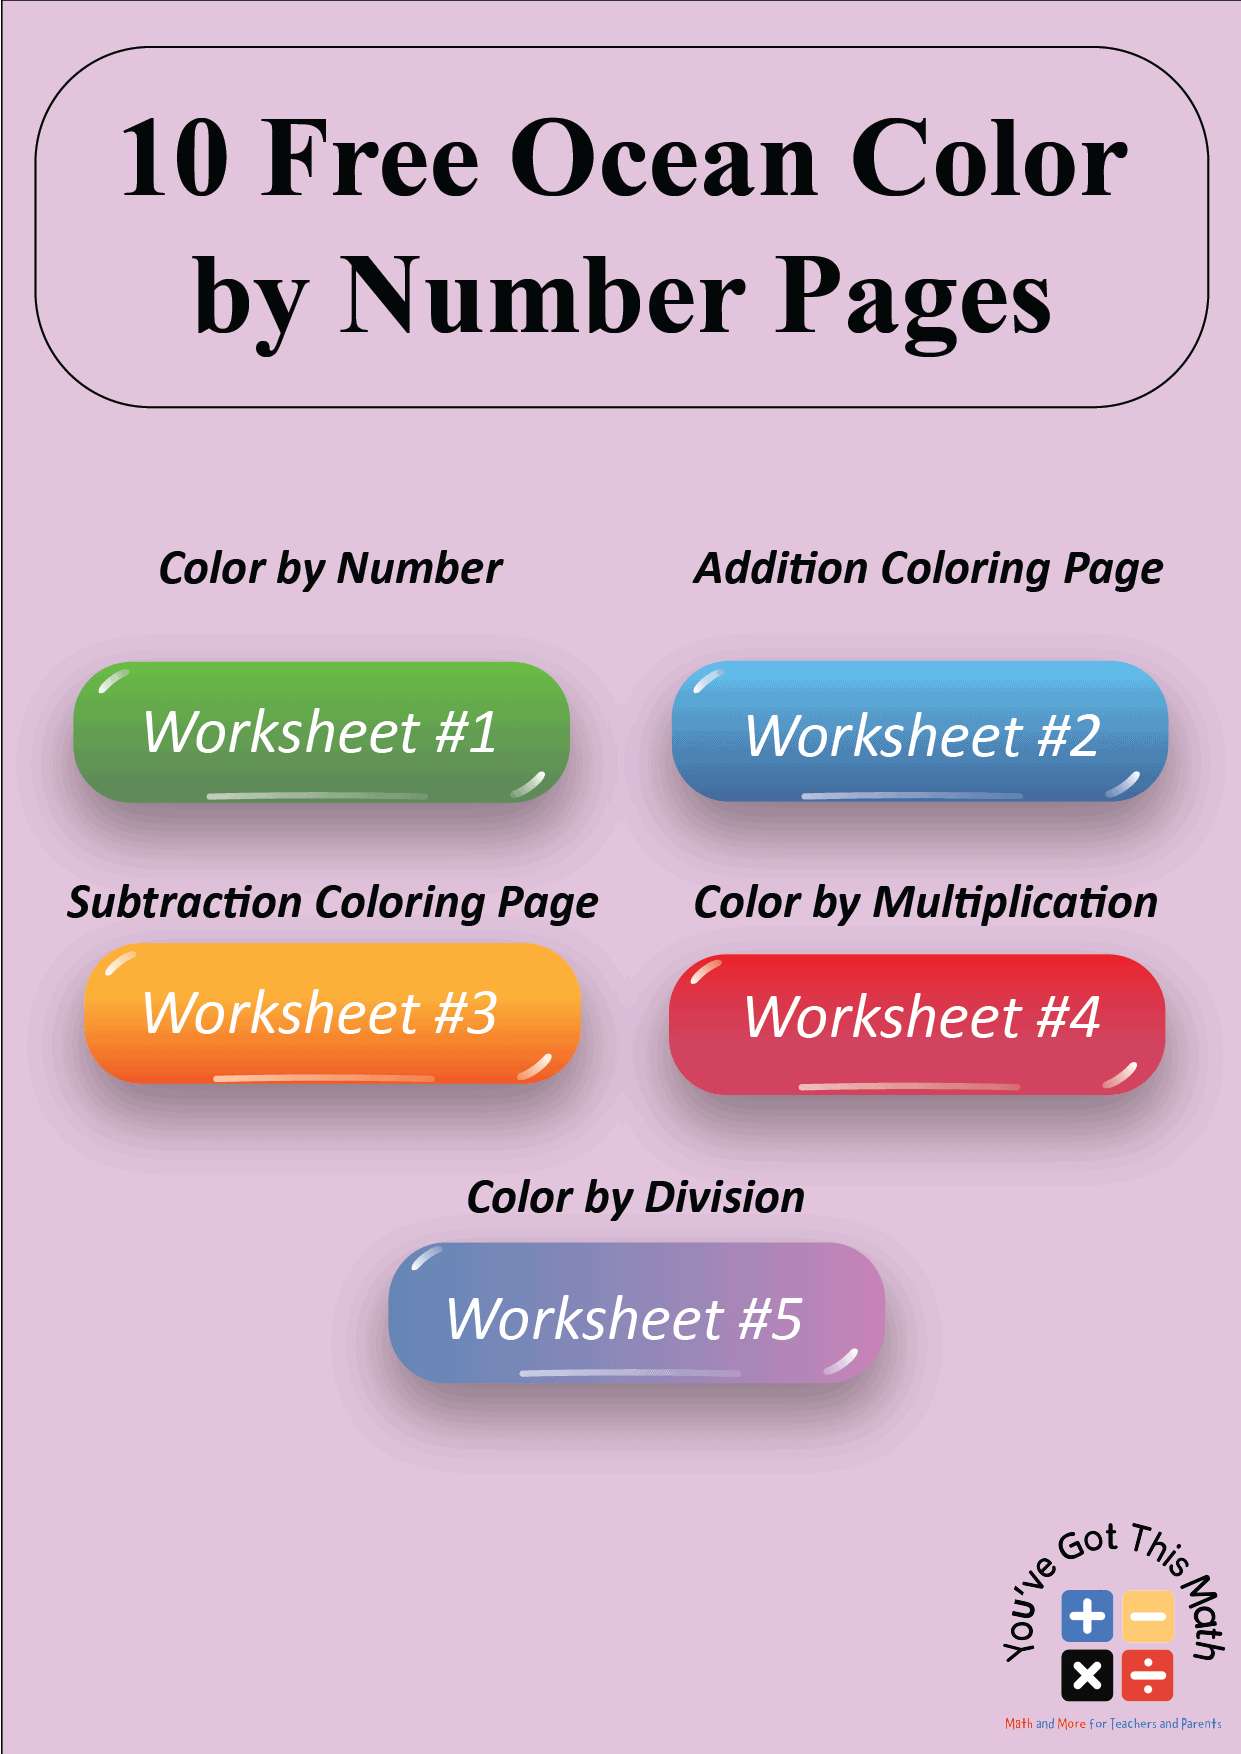 Ocean Color by Number Pages 